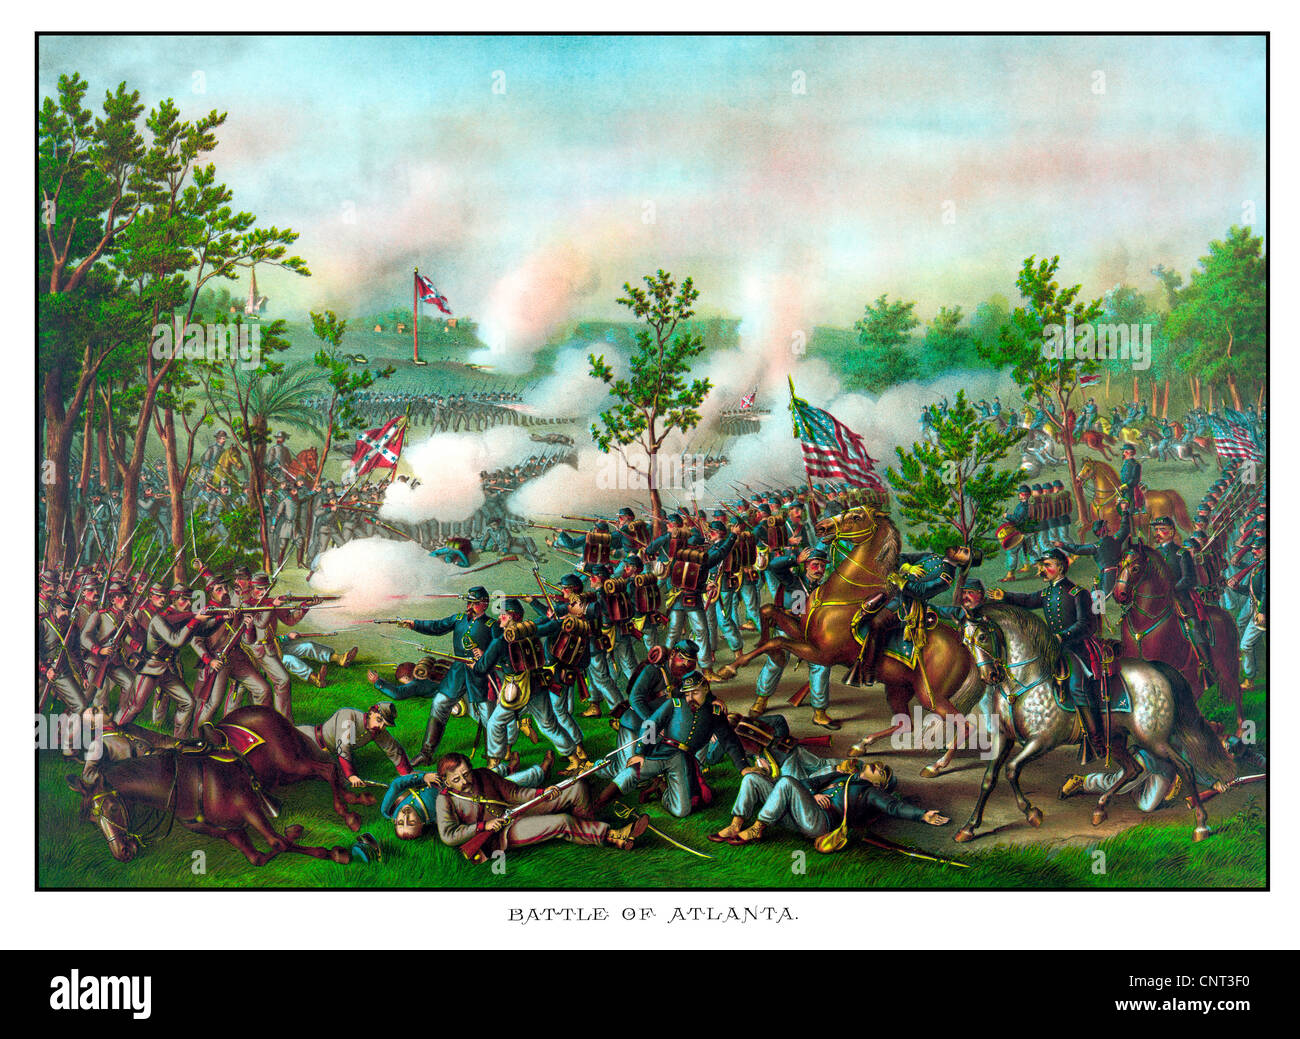 Vintage American Civil War print of The Battle of Atlanta and the death of Union General James McPherson. Stock Photo